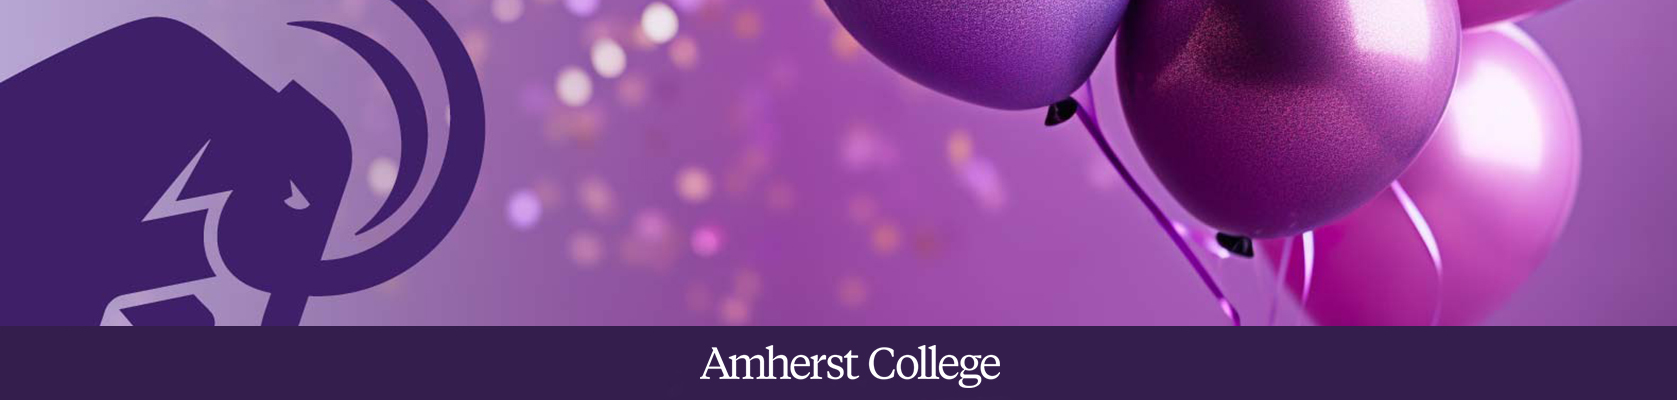 The Amherst Mammoth with some purple balloons.